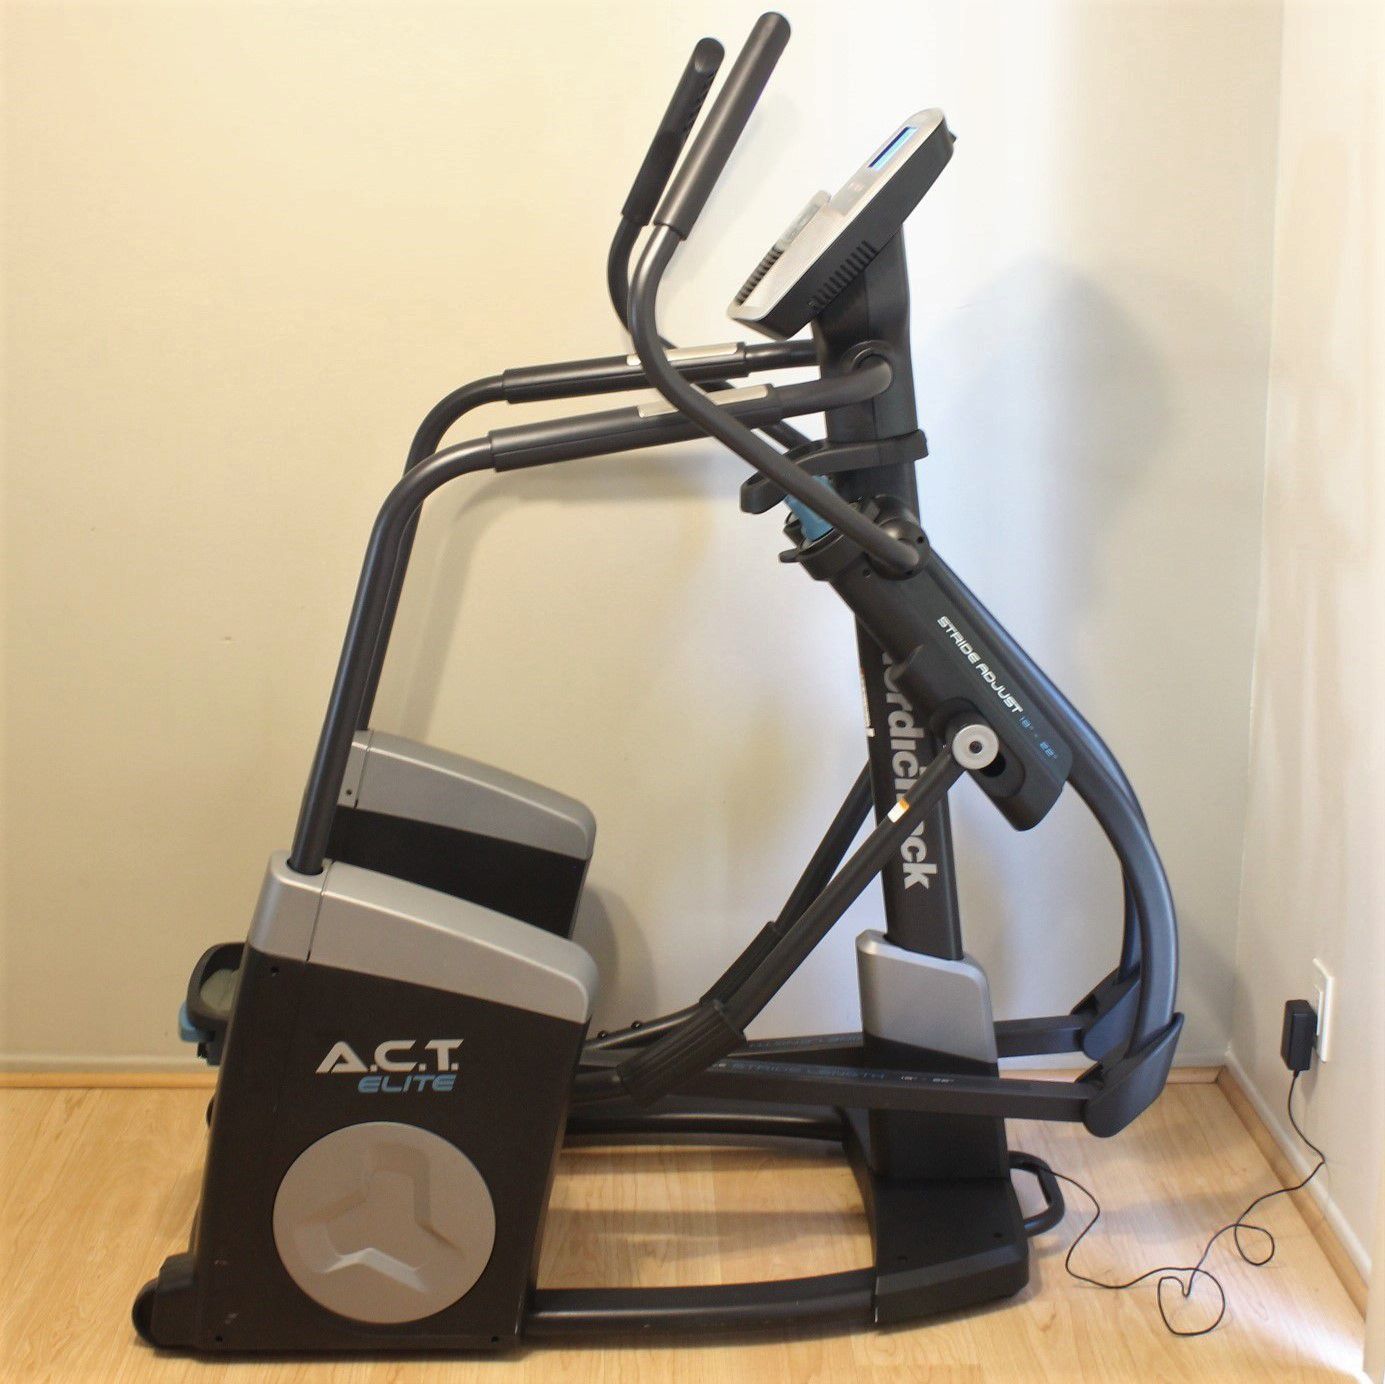 NordicTrack A.C.T. Elite Elliptical Cross-Trainer Exercise Workout Machine Cardio Fitness Treadmill